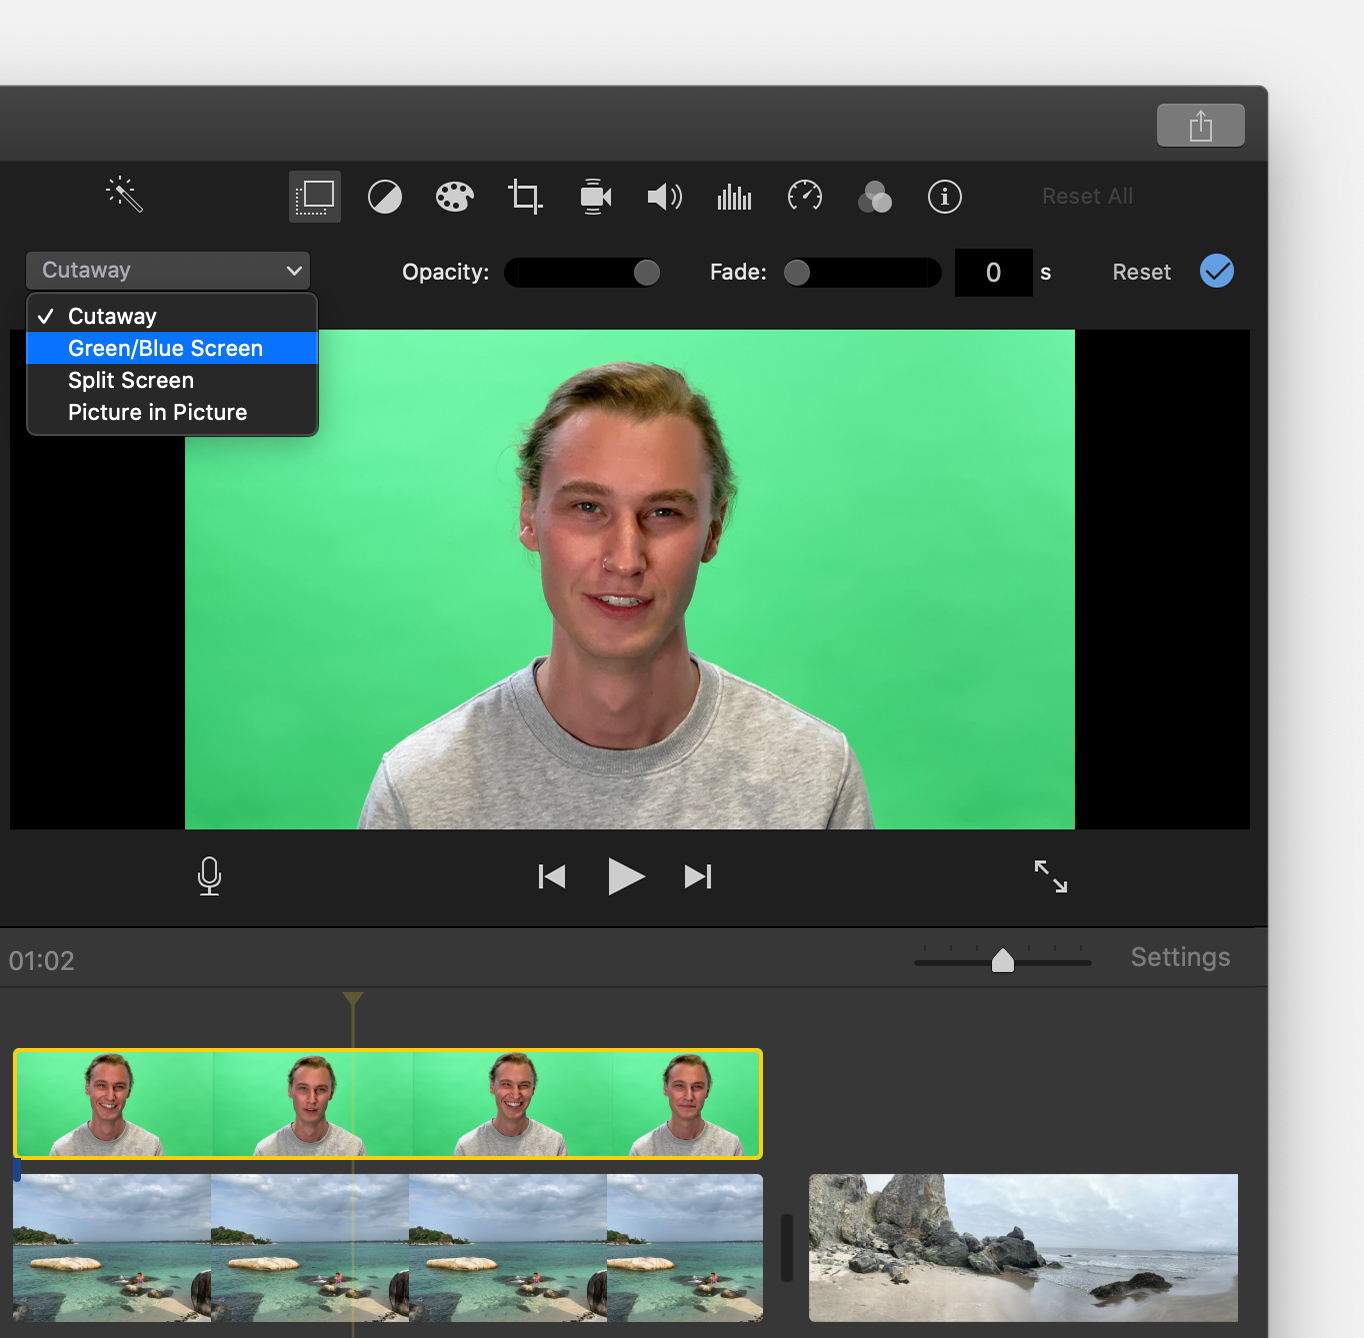 How To Stop Images From Moving In Imovie On Ipad